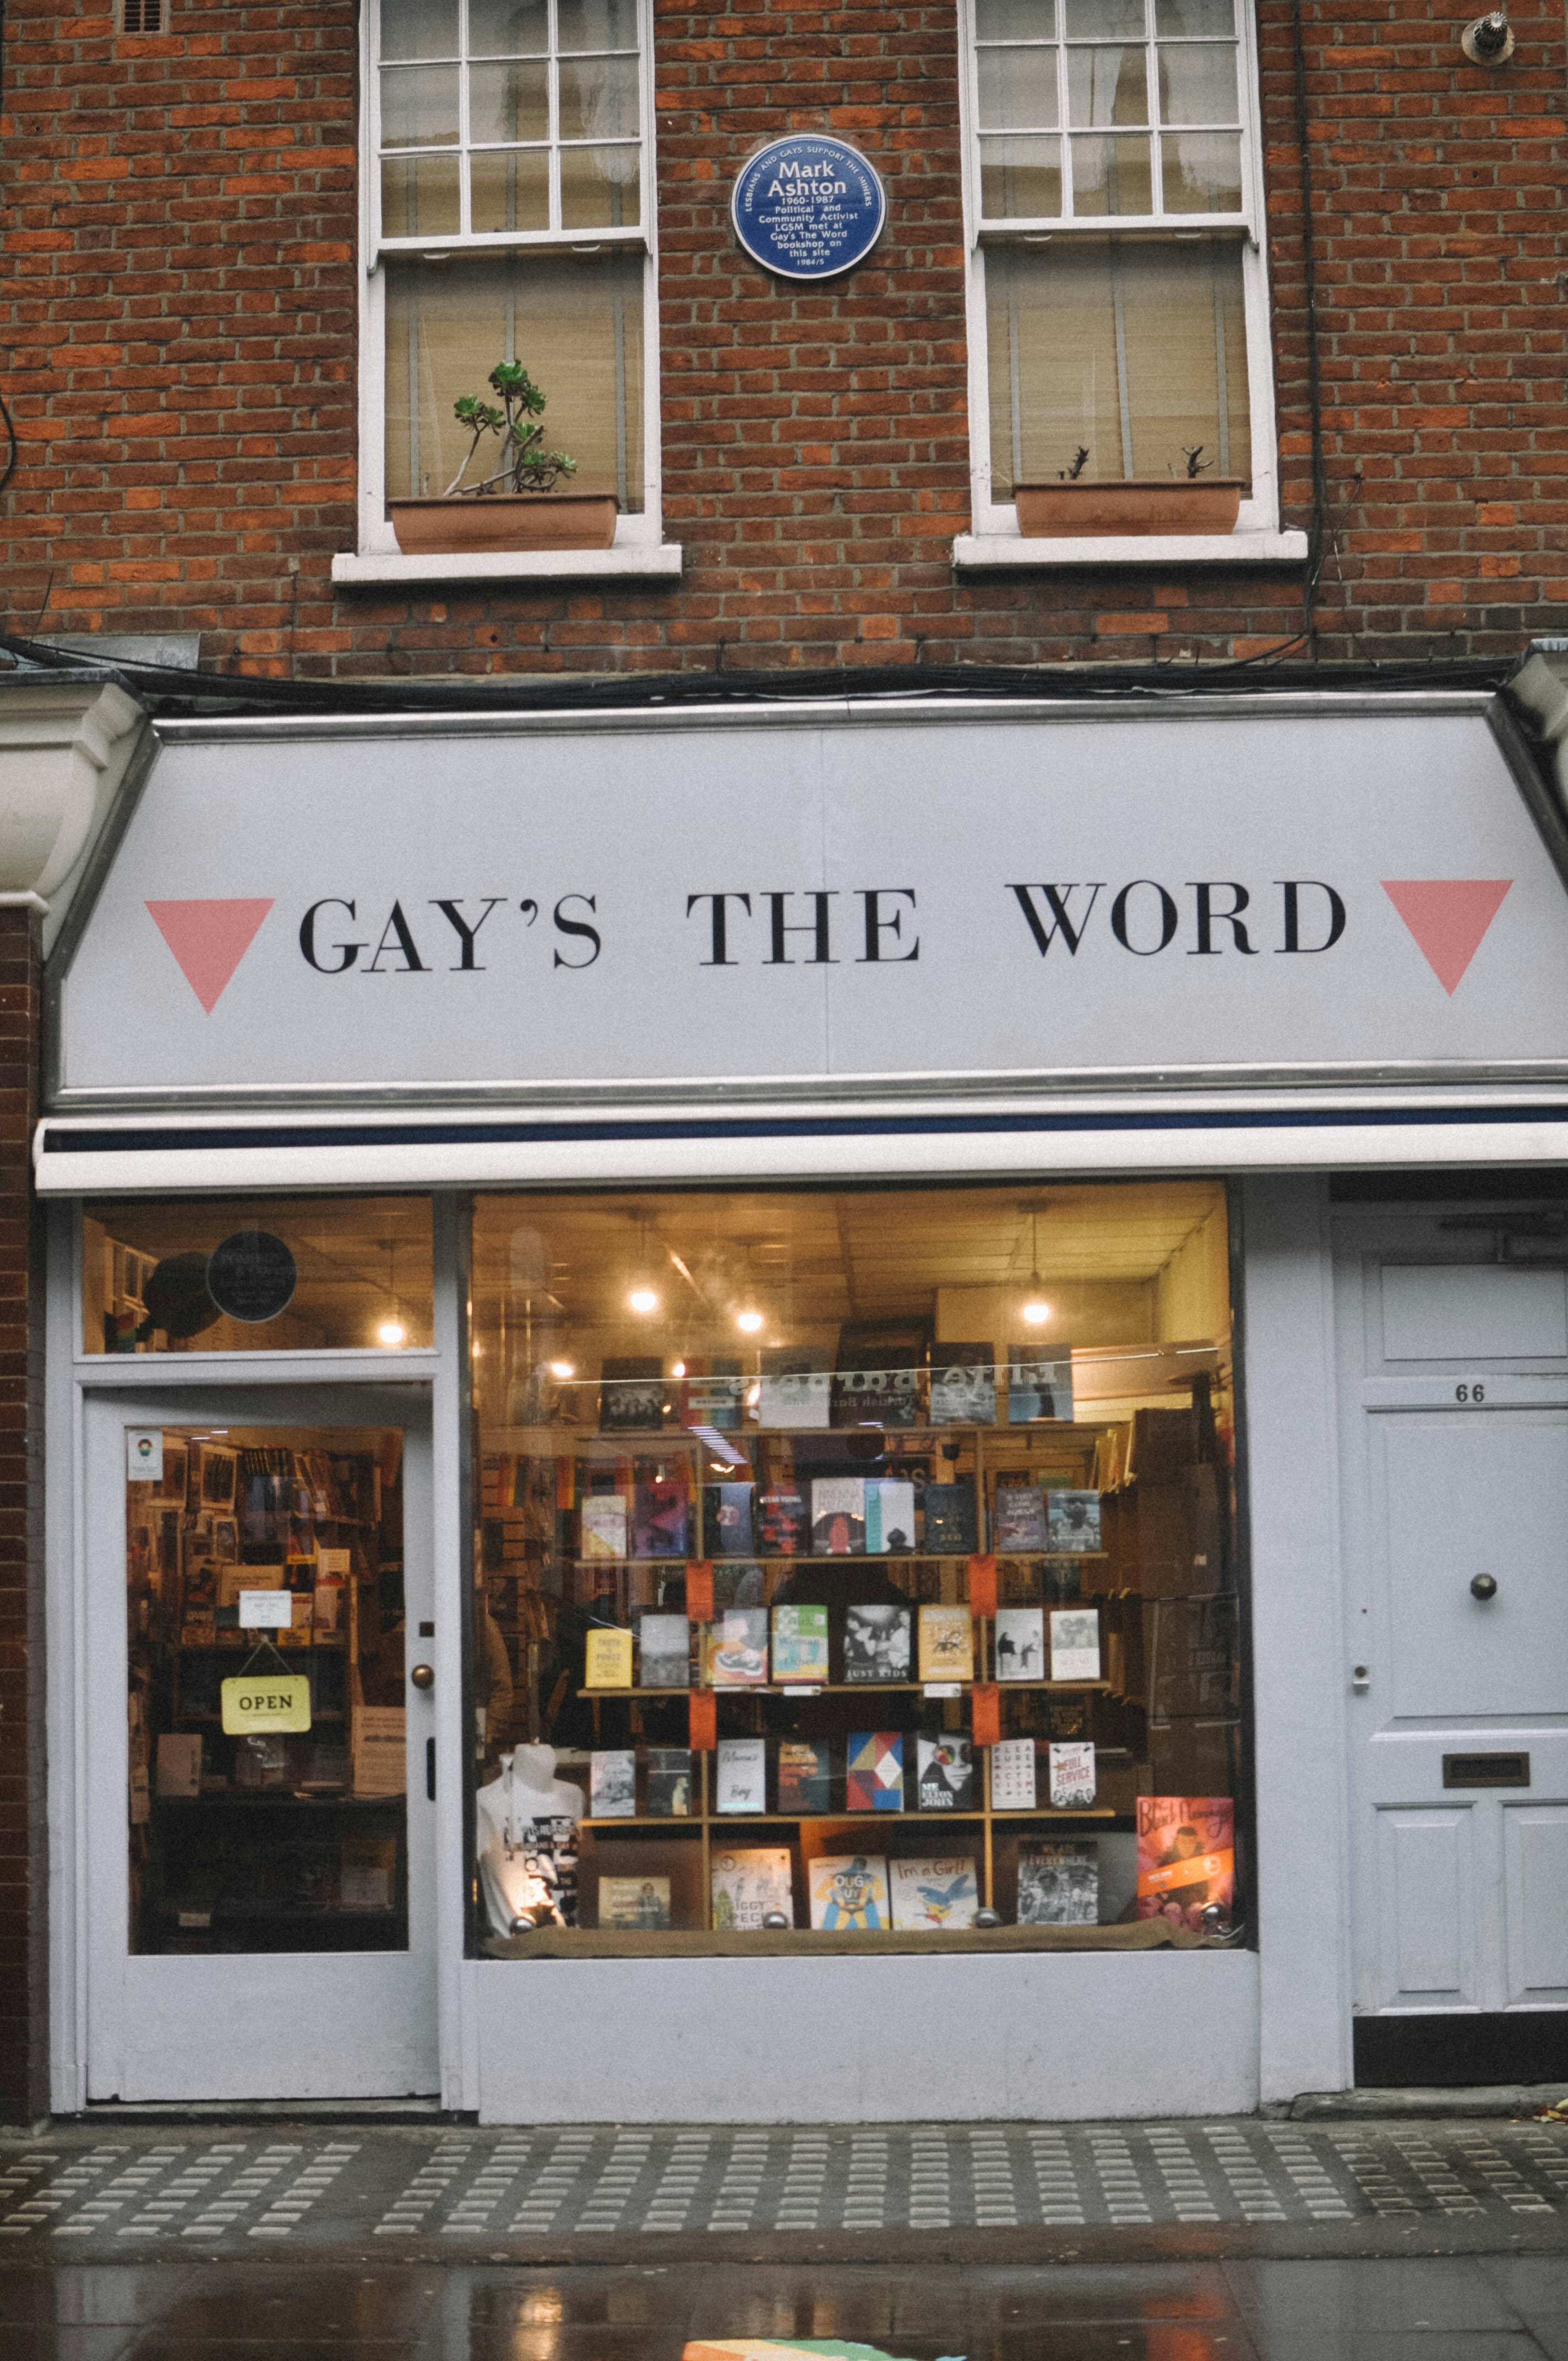 The white facade of Gay's the Word has pink triangles at the side of name. Books fill the window display, facing outwards.